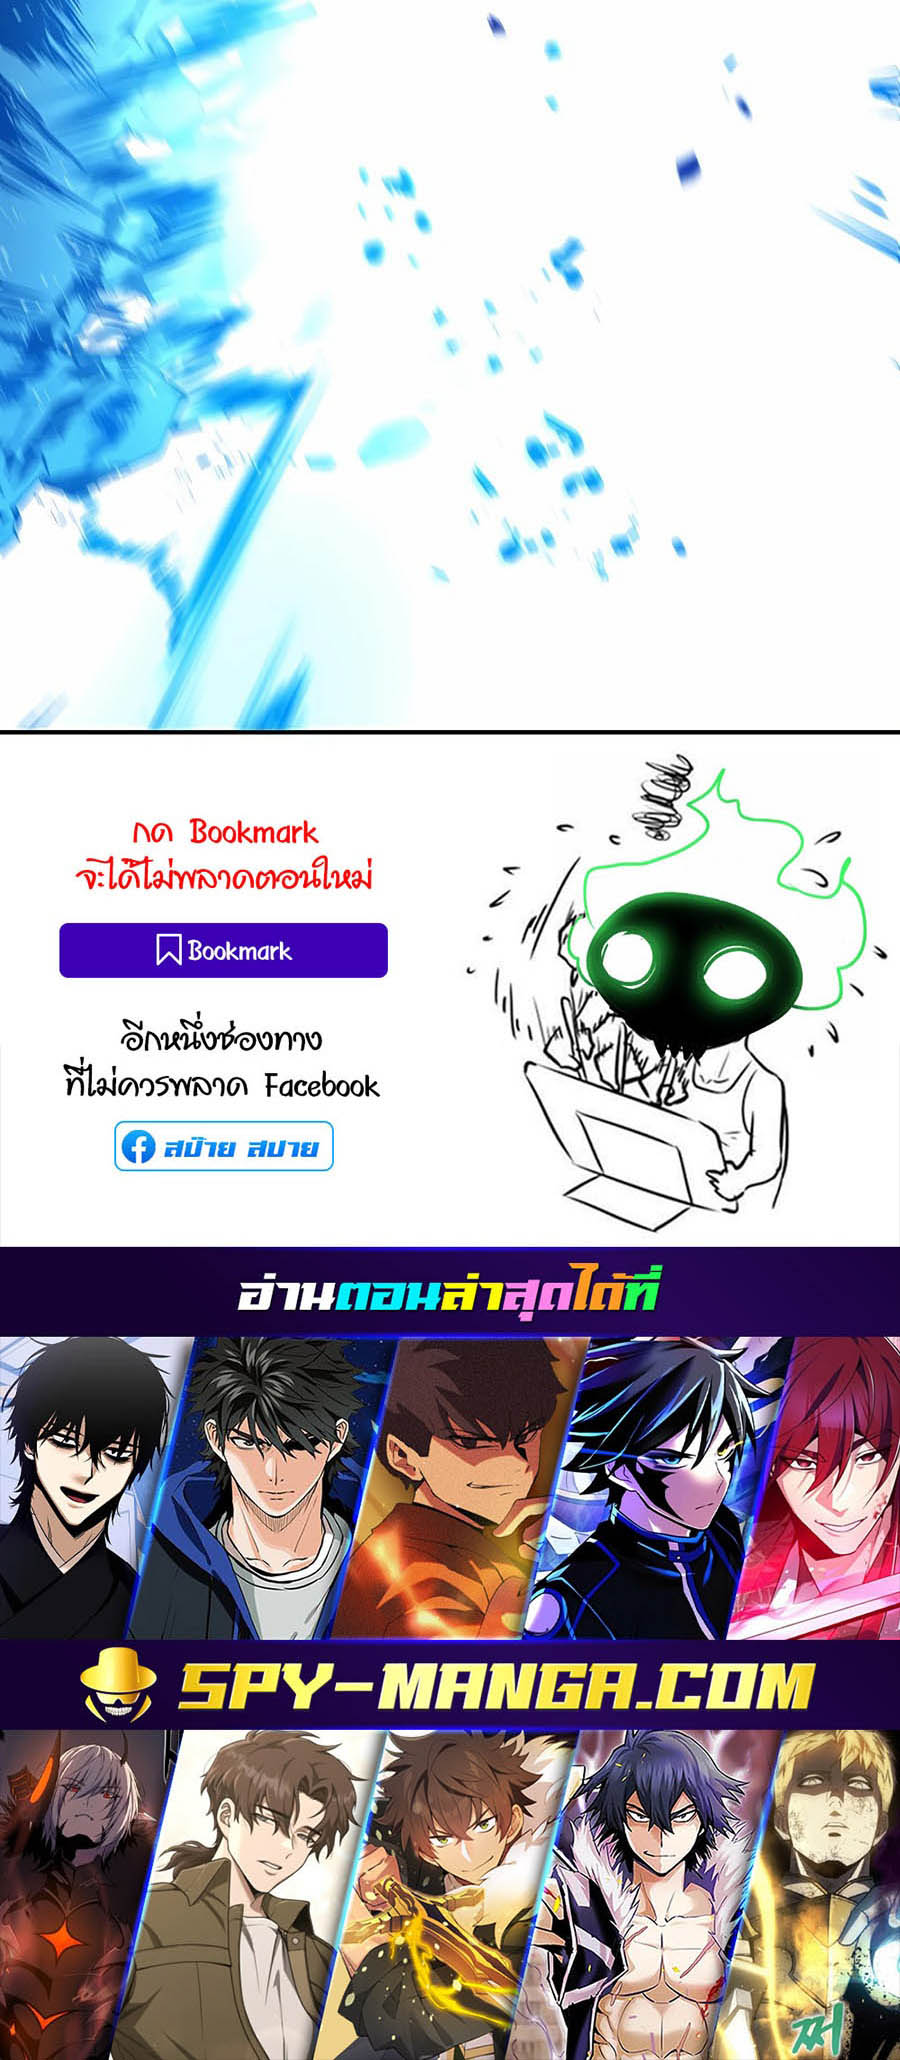 à¸­à¹ˆà¸²à¸™à¸¡à¸±à¸™à¸®à¸§à¸² à¹€à¸£à¸·à¹ˆà¸­à¸‡ The Part Time Land of the Gods 56 93